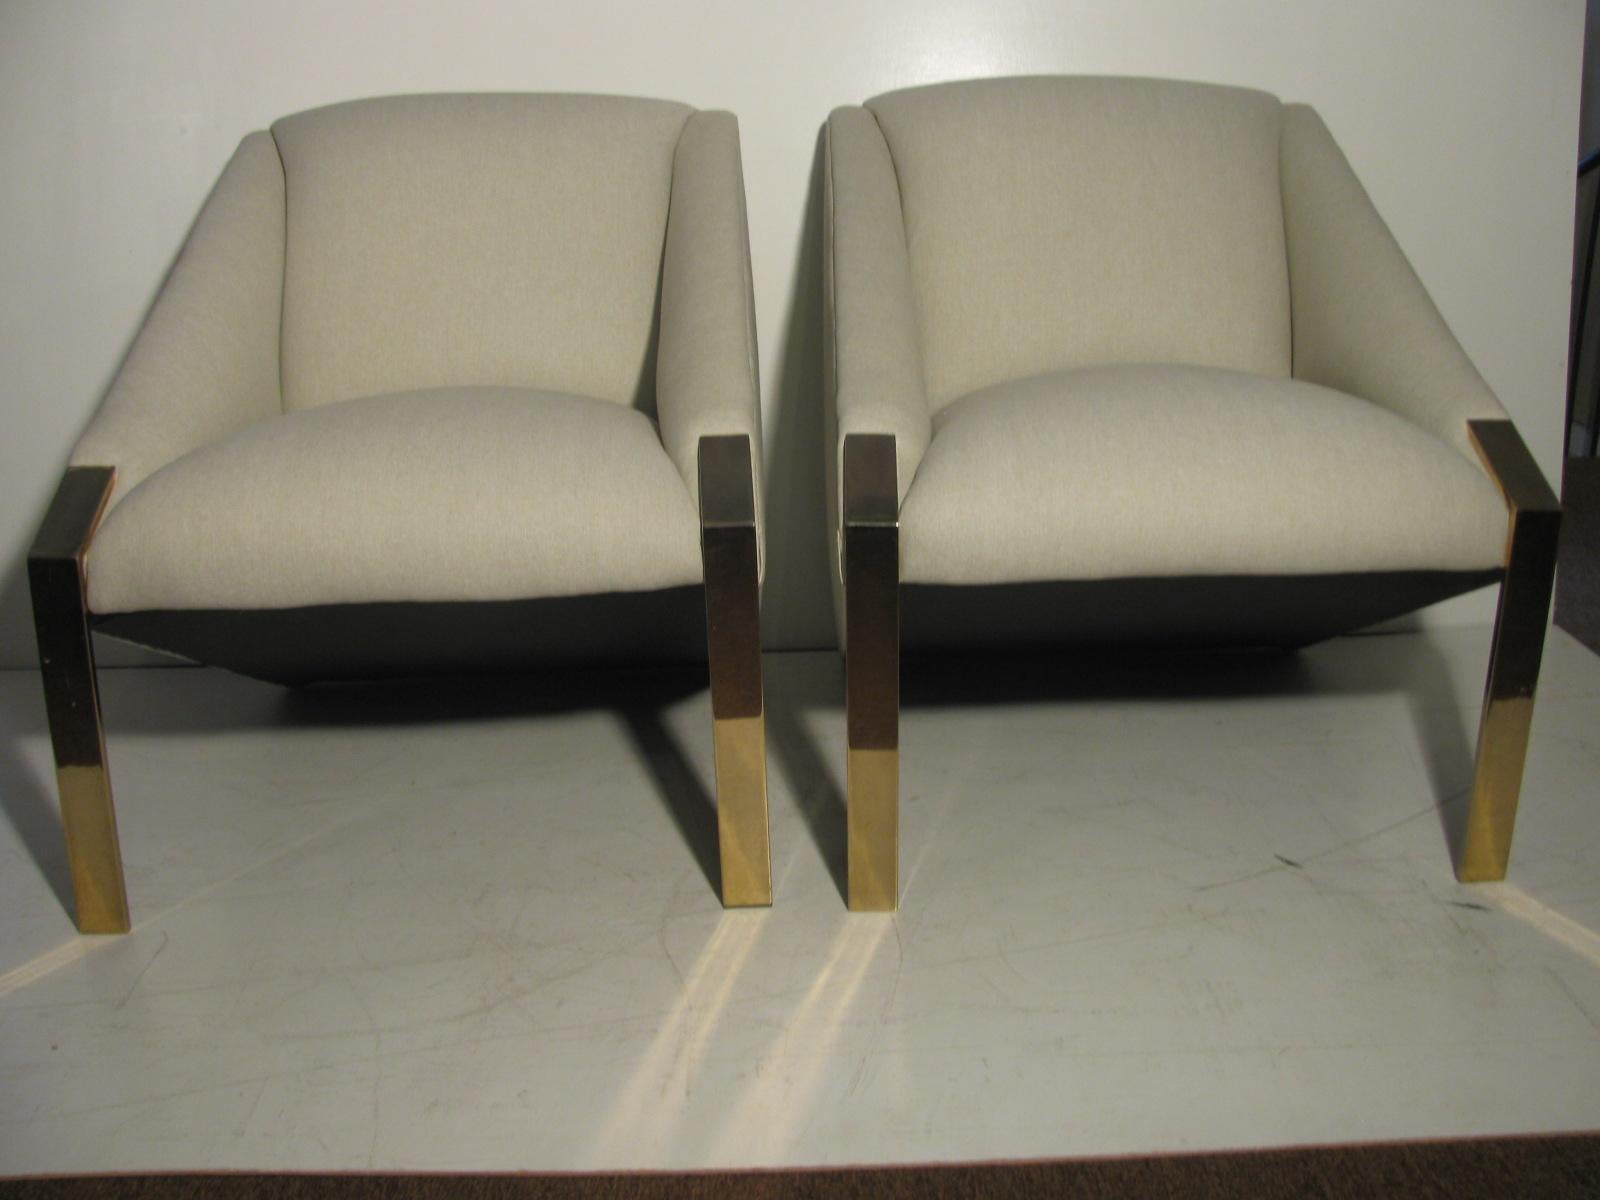 Pair of Mid-Century Modern Lounge Club Chairs 1